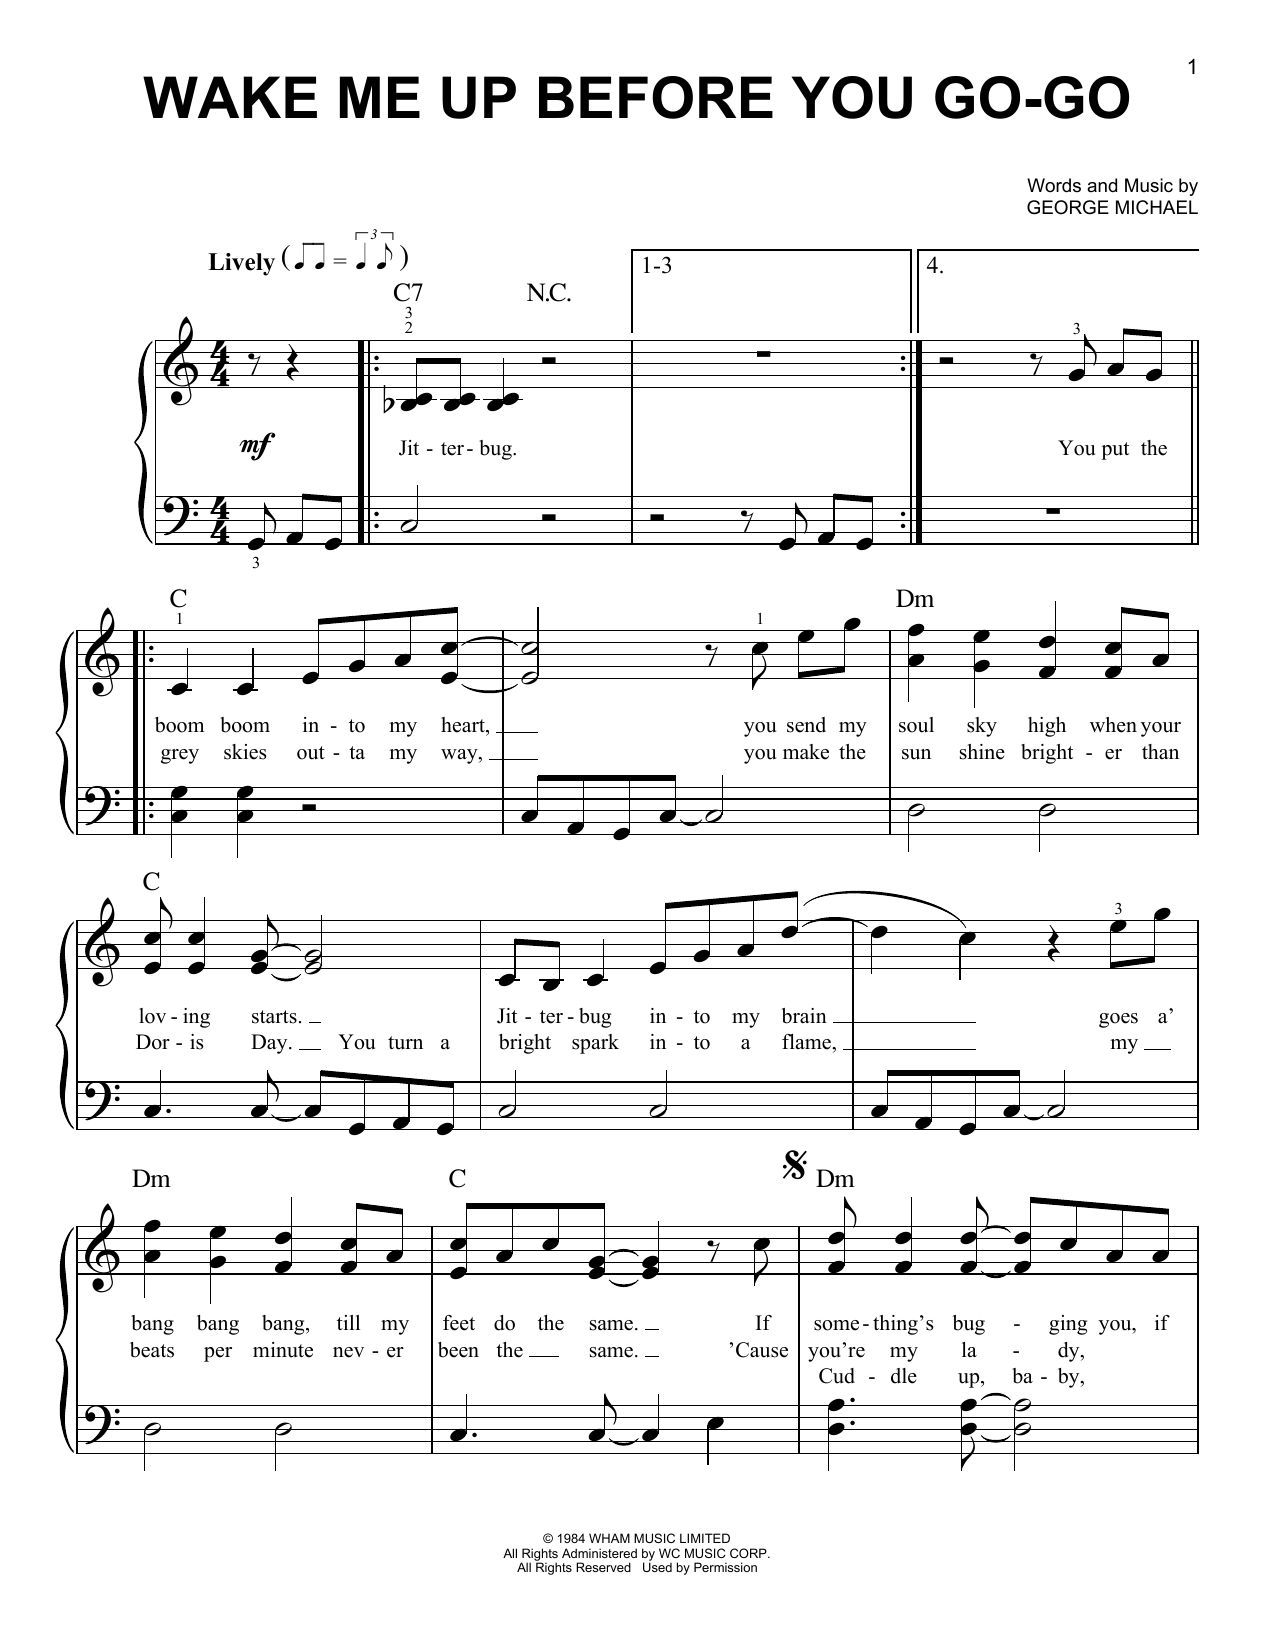 Download Wham! Wake Me Up Before You Go-Go Sheet Music